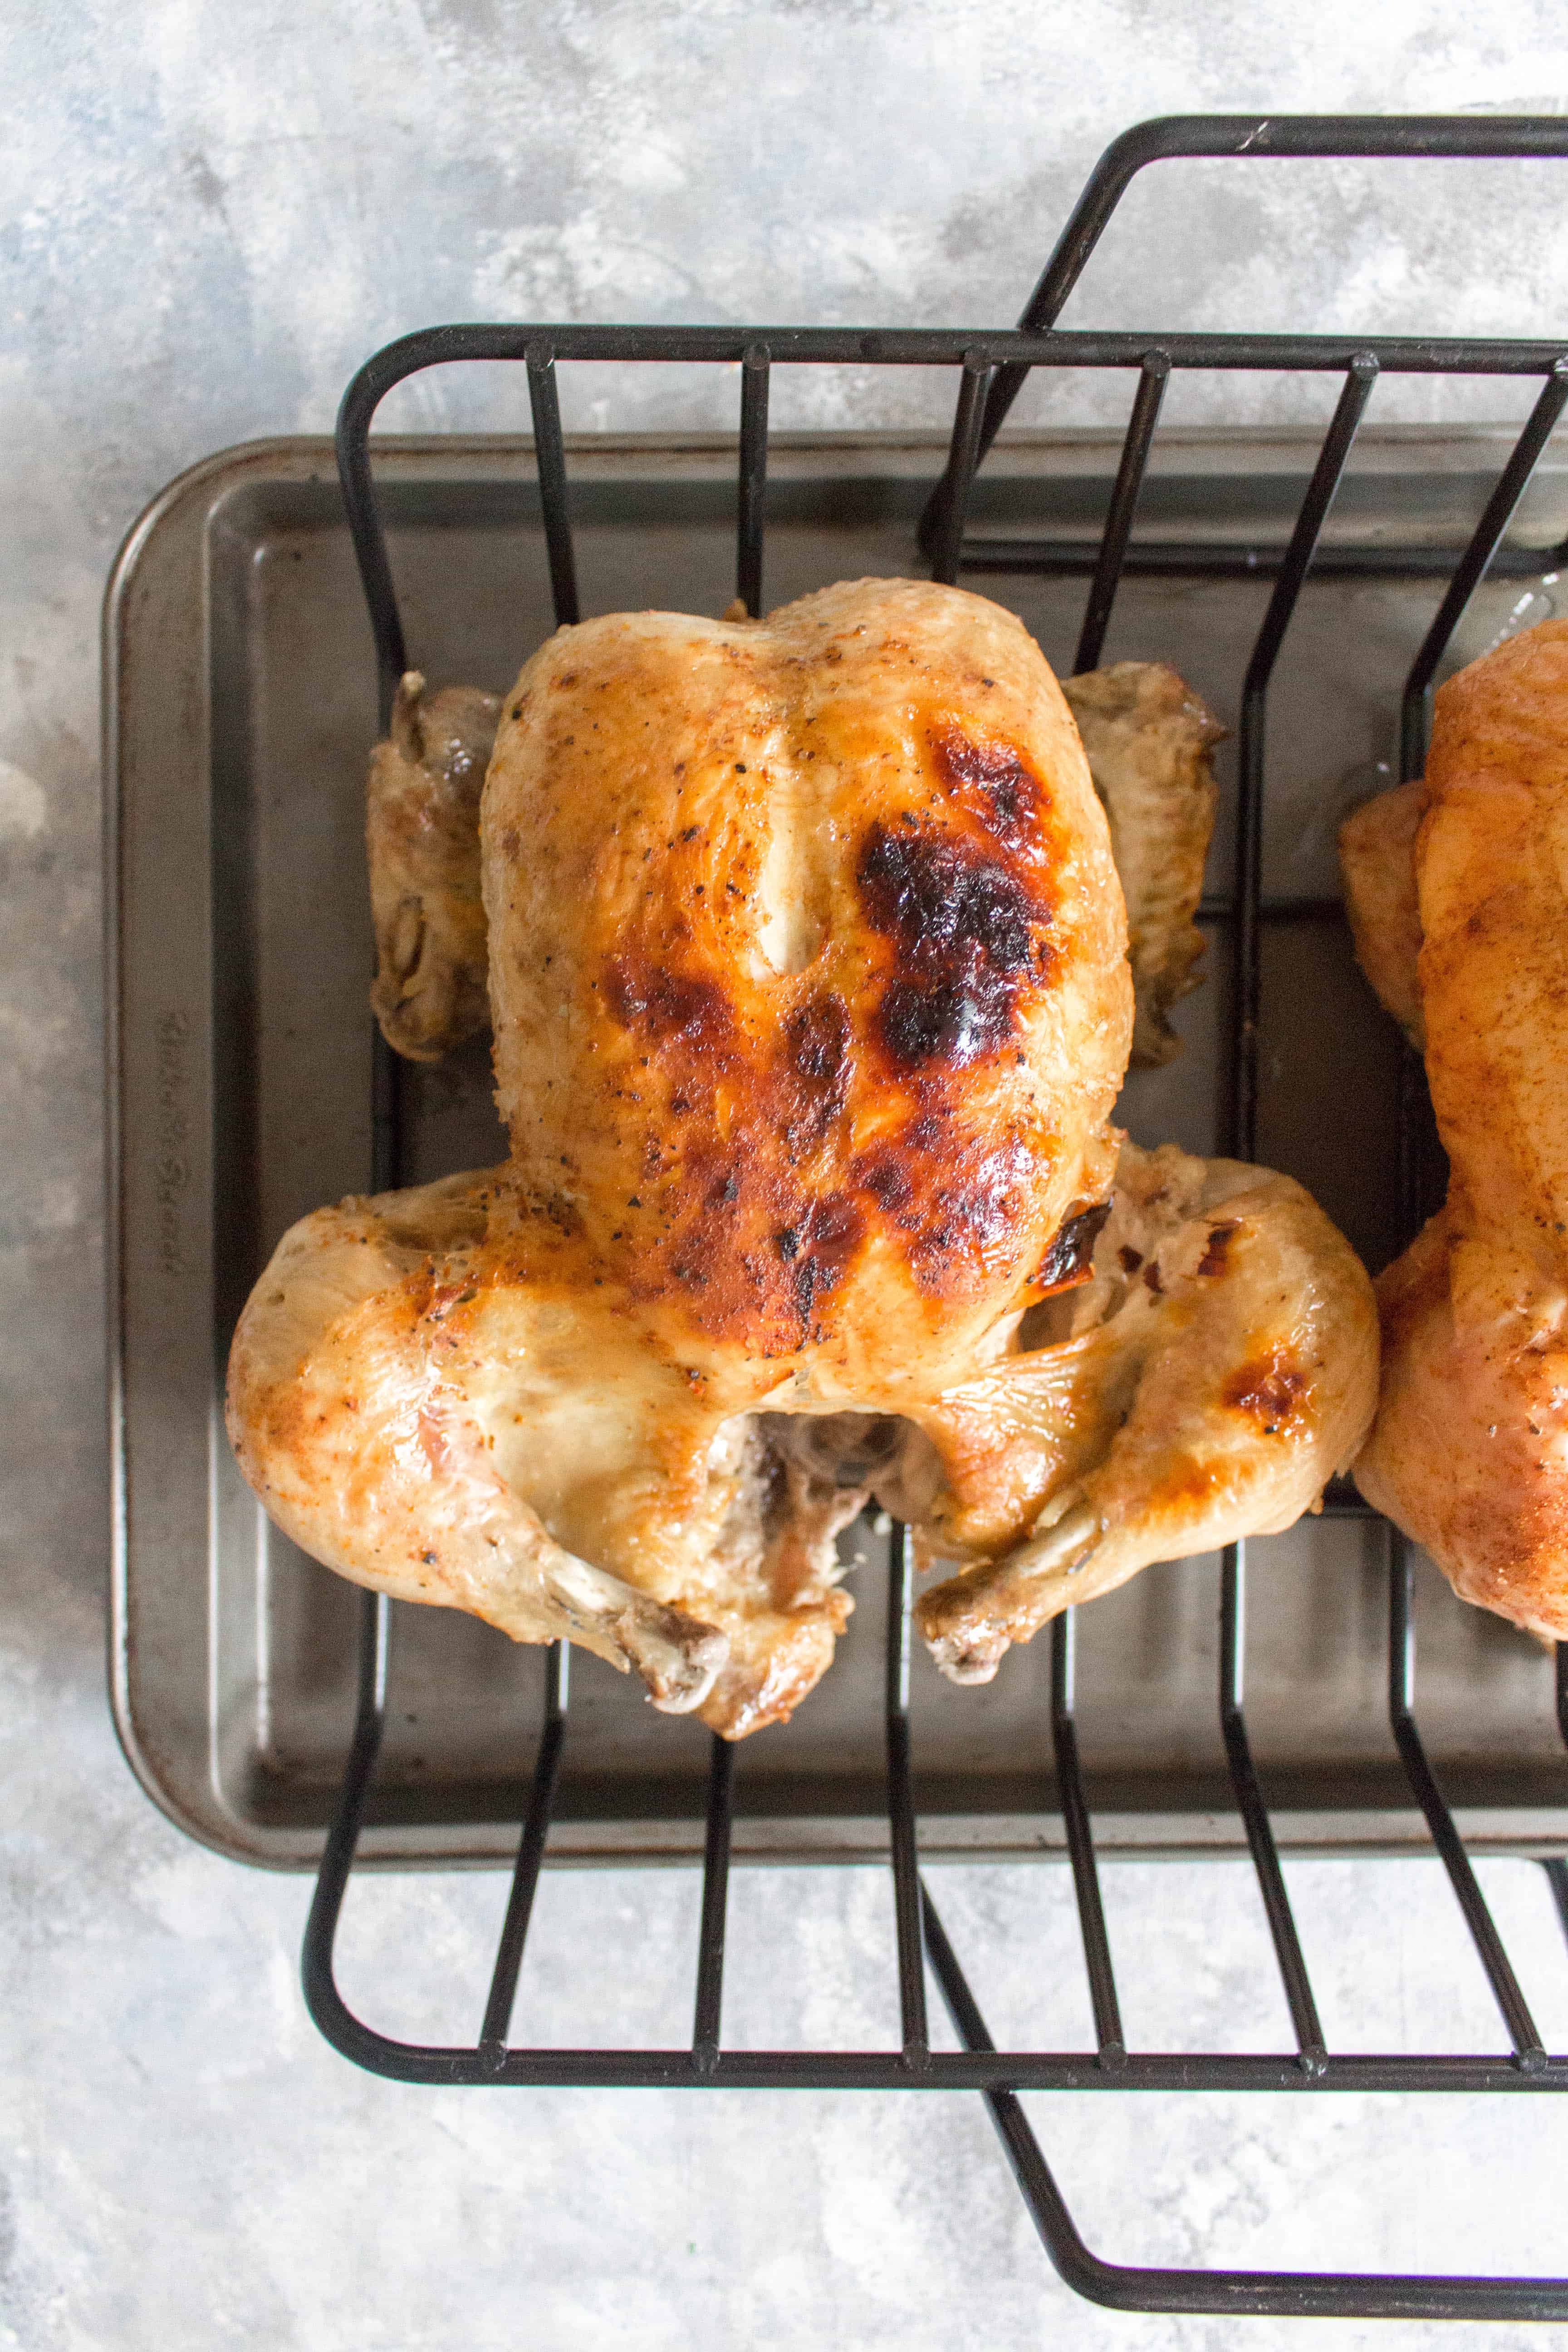 Curious as to how to cook a whole chicken in an Instant Pot? Keep reading to see how you can make a delicious, fall off the bone, and moist whole chicken in an Instant Pot!